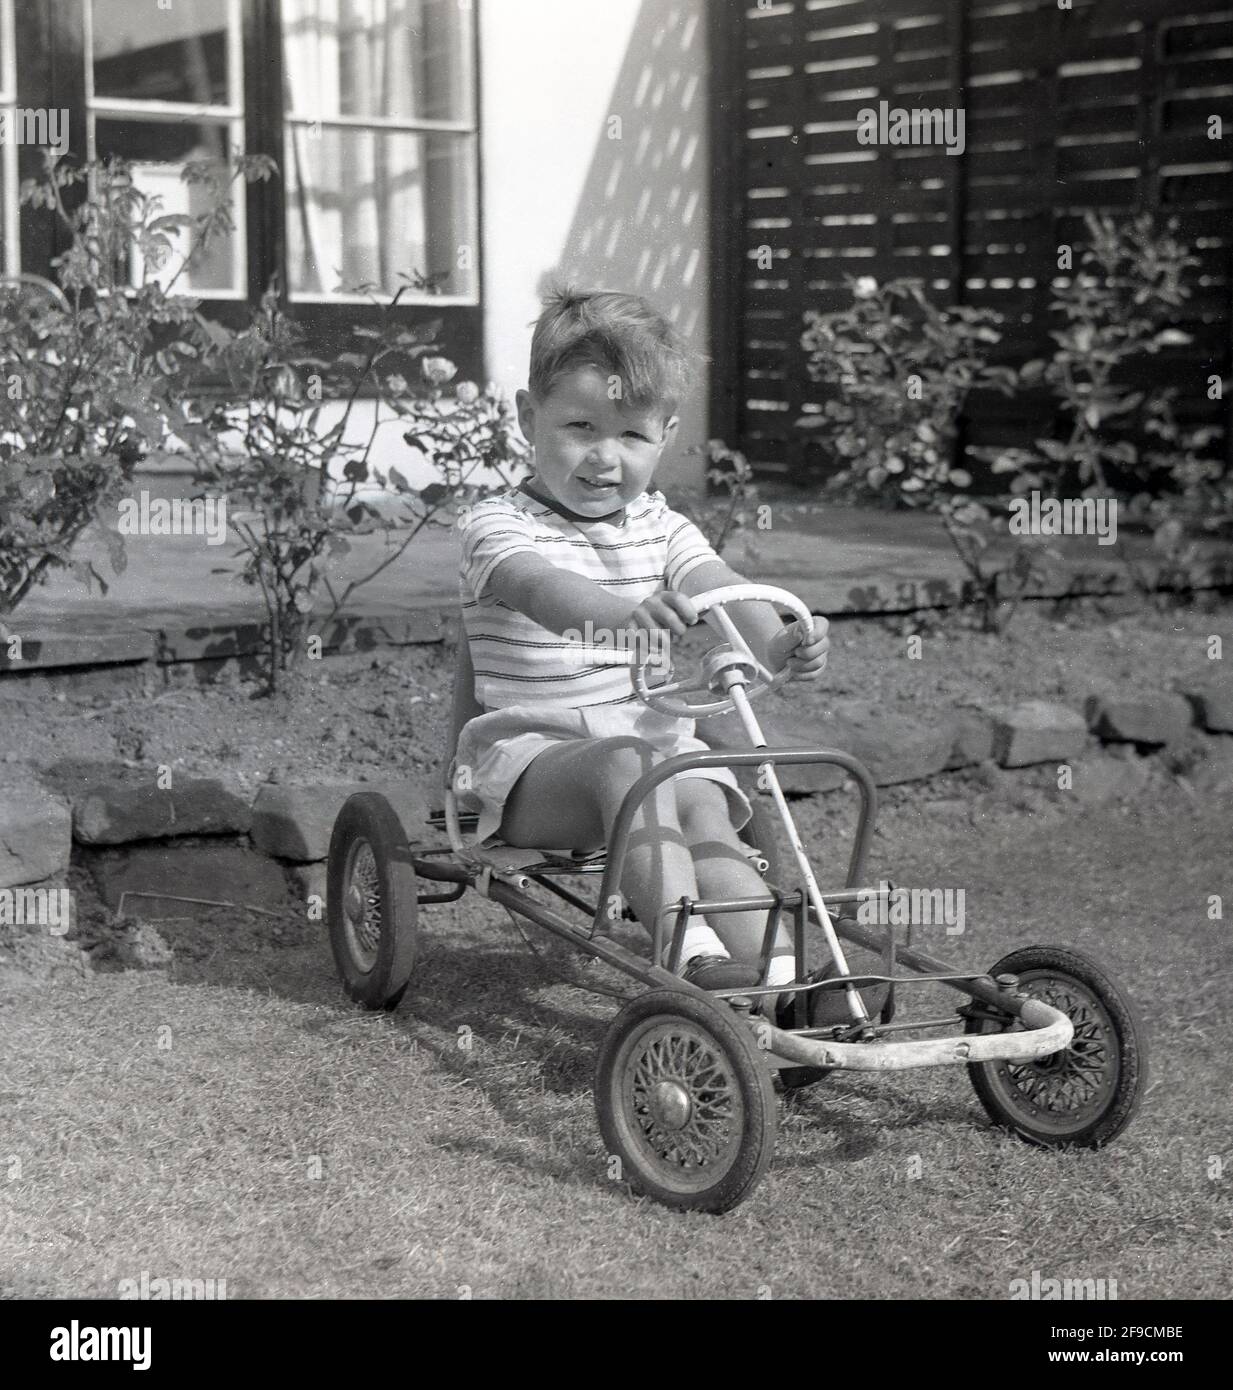 1966, historical, outside in a garden, a young boy, sitting, with his hands on the plastic steering wheel, in a four-wheeled metal-framed pedal toy car. As it is minus the outer shell - maybe broken over time - the toy could be a hand-med-down. Or looking at it, quite possibly a DIY home-made machine made from spare pieces of metal and four old pram wheels. Stock Photo